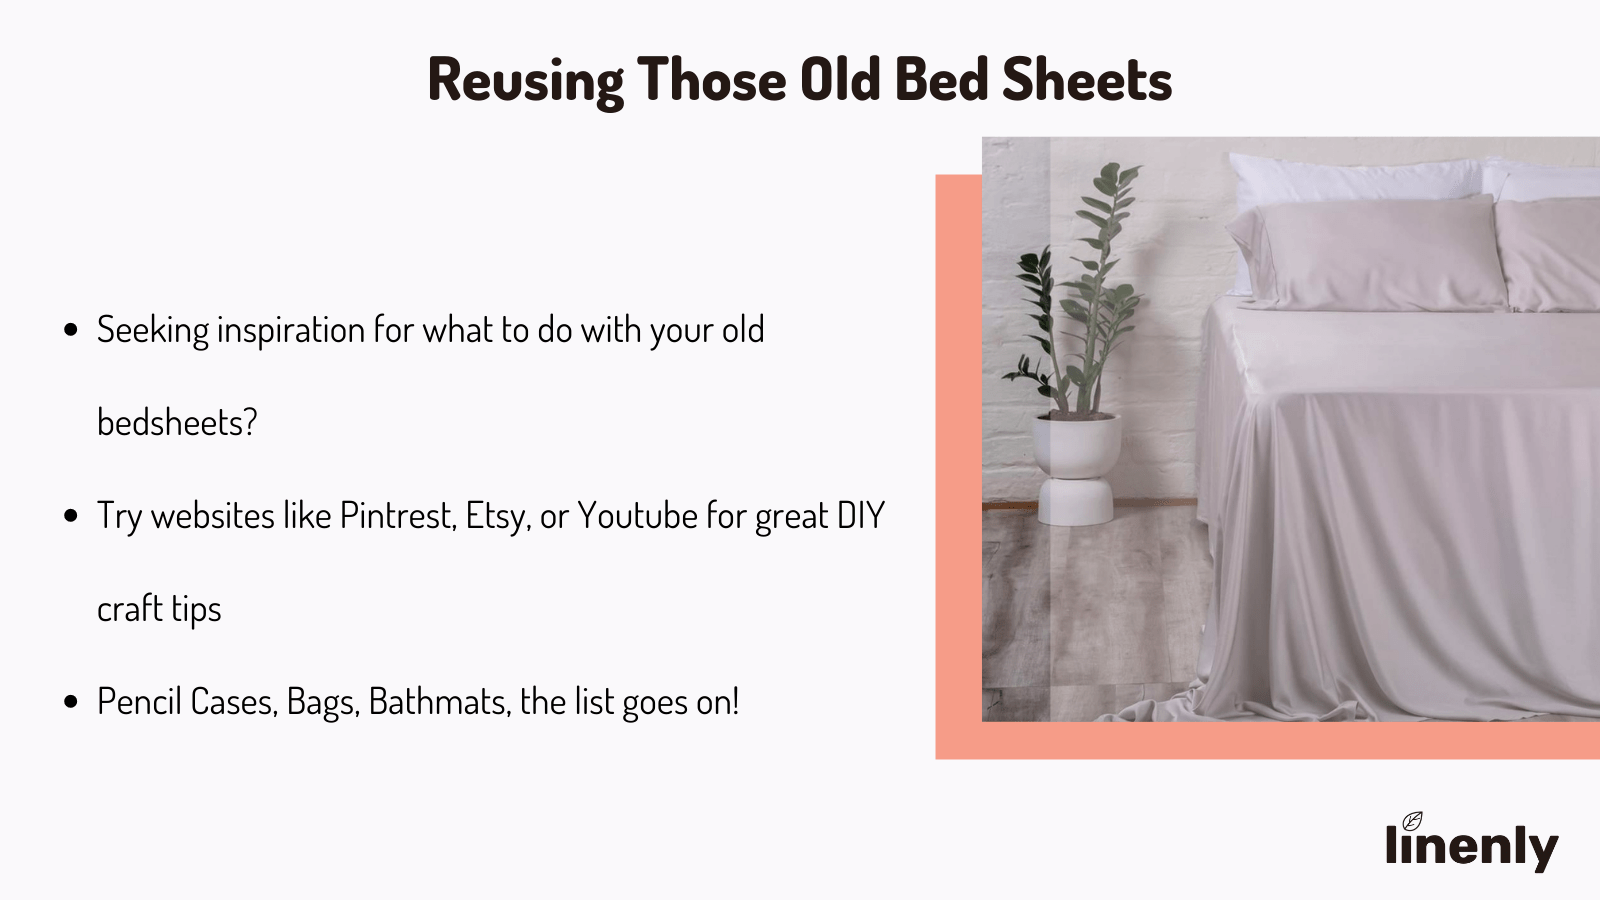 https://cdn.shopify.com/s/files/1/0040/3288/8944/files/What_To_Do_With_OId_Sheets_1.png?v=1644791033